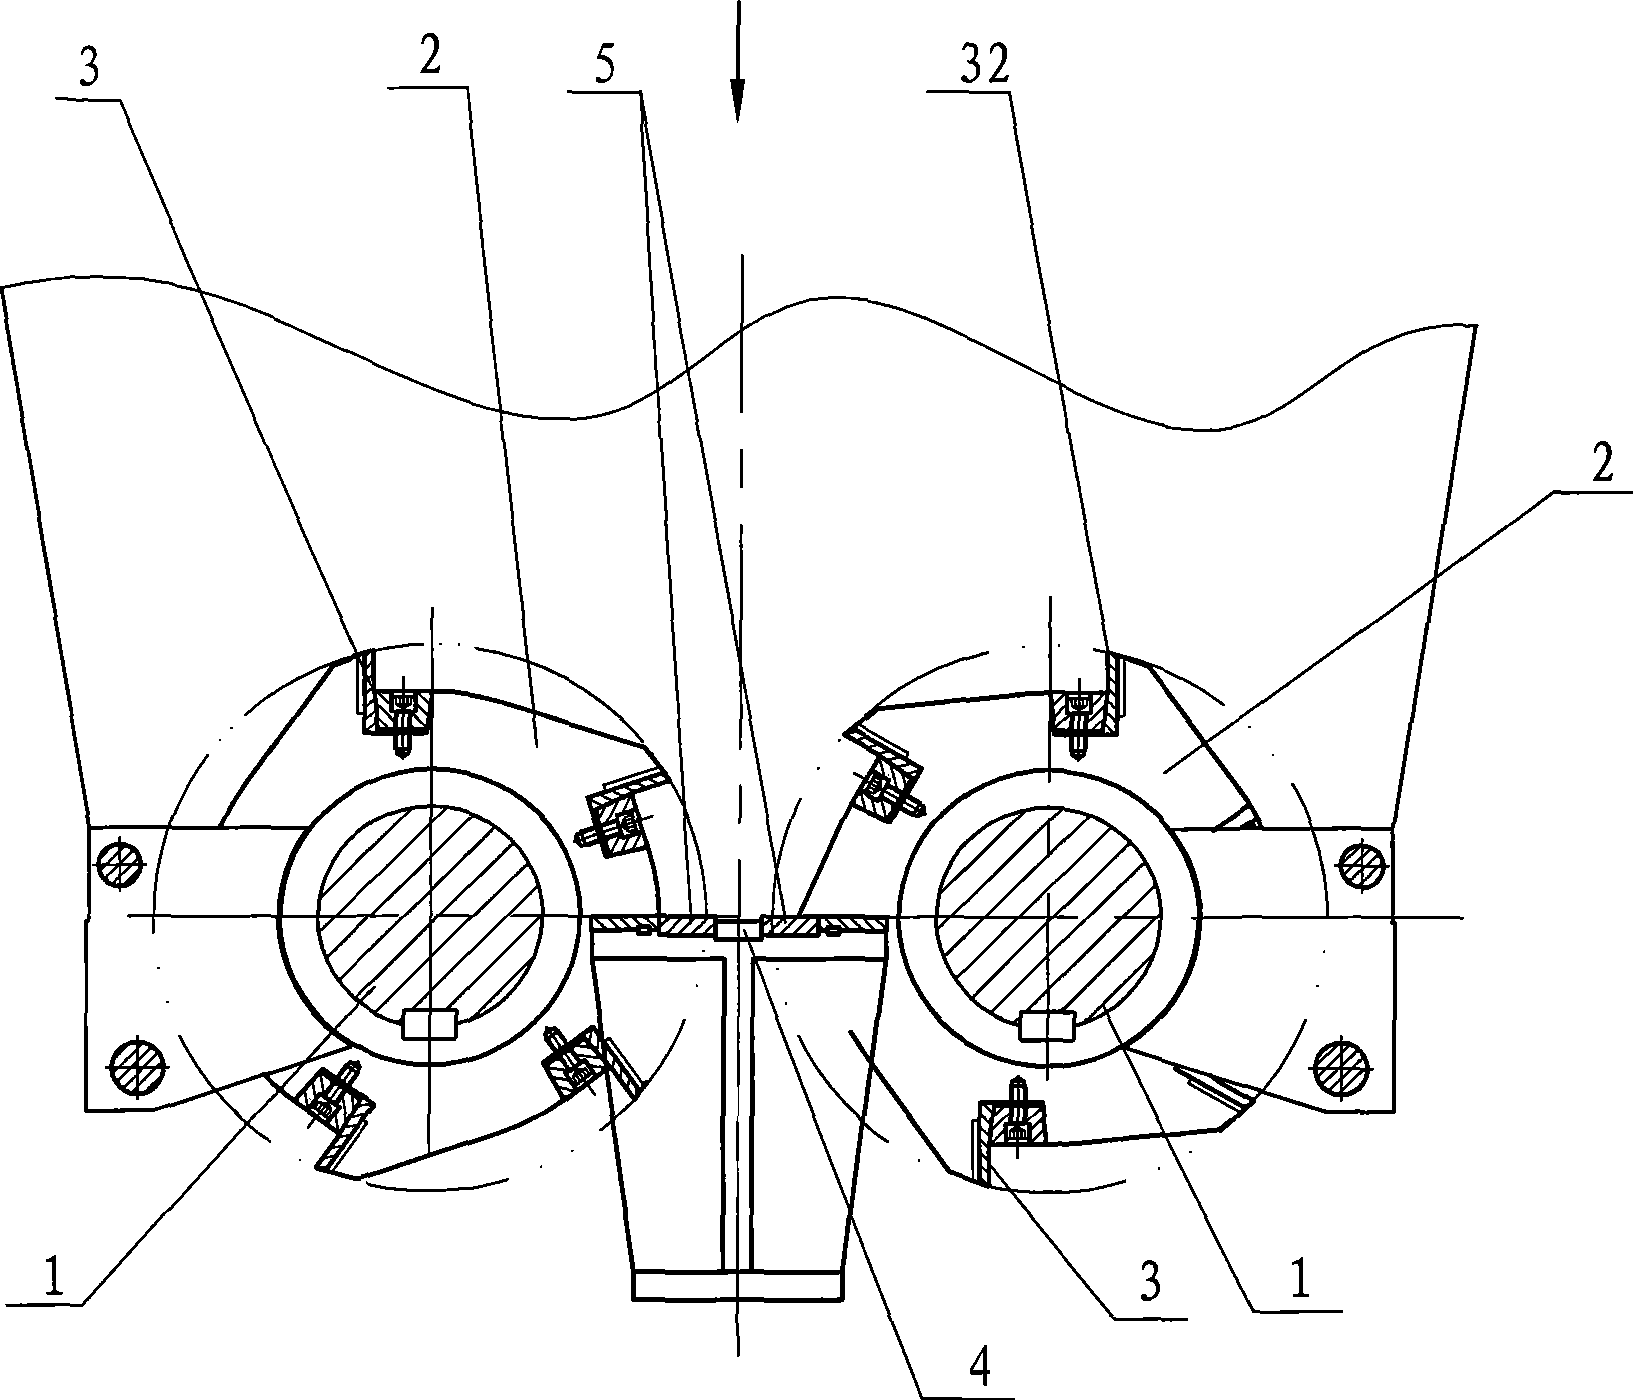 Straw crushing device with combined bed knife